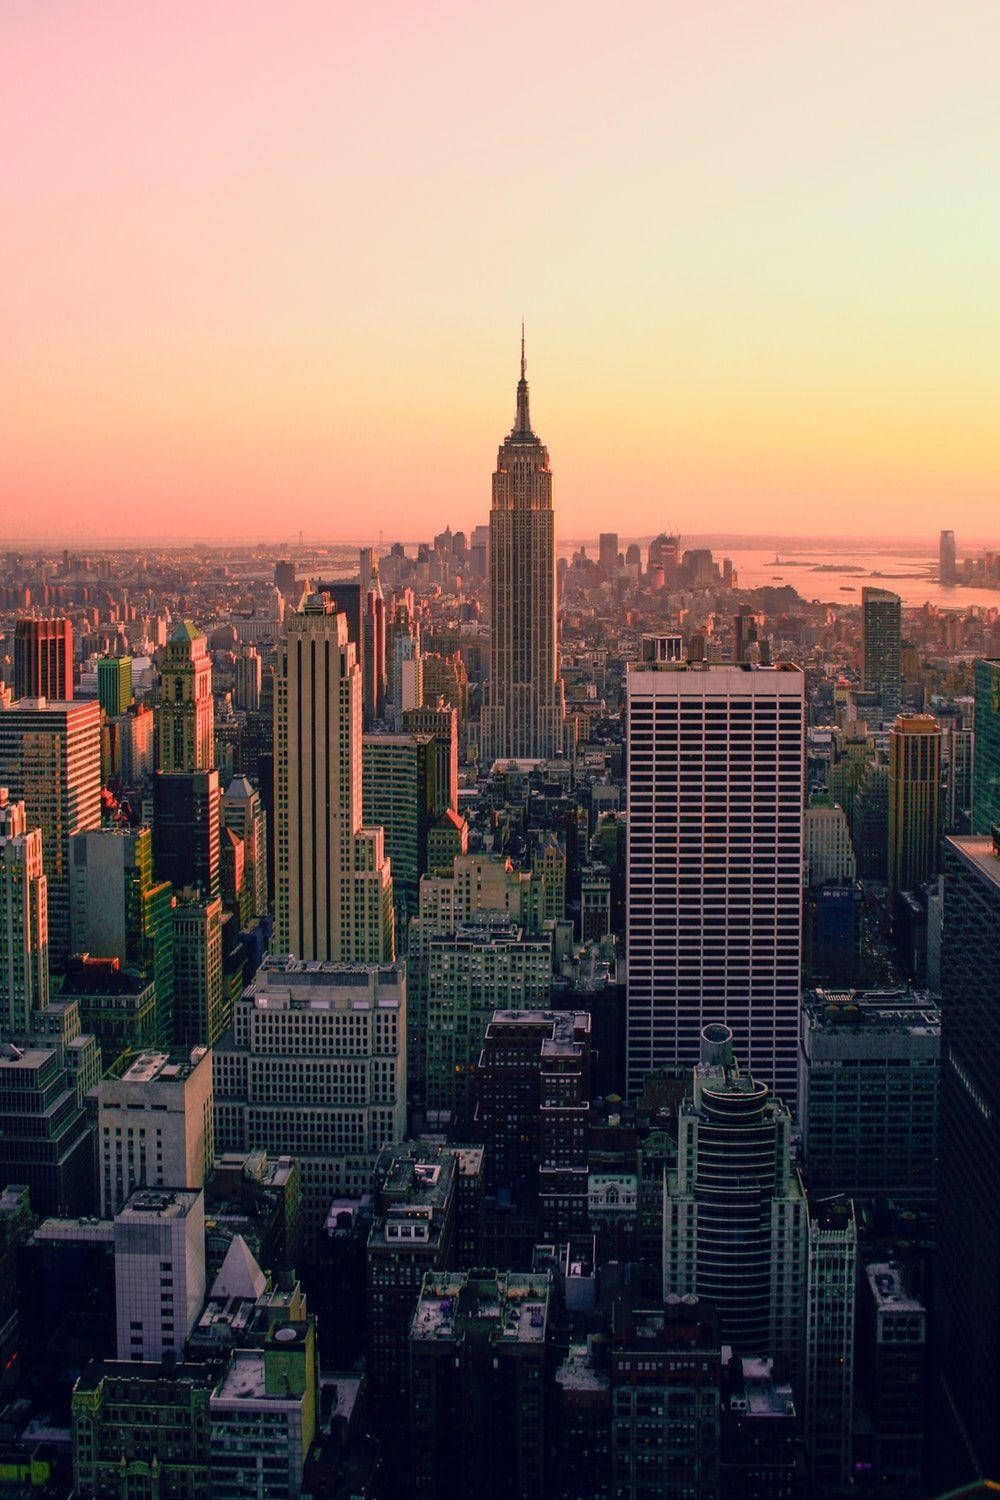 A city skyline at sunset with the empire state building in it - New York, Broadway